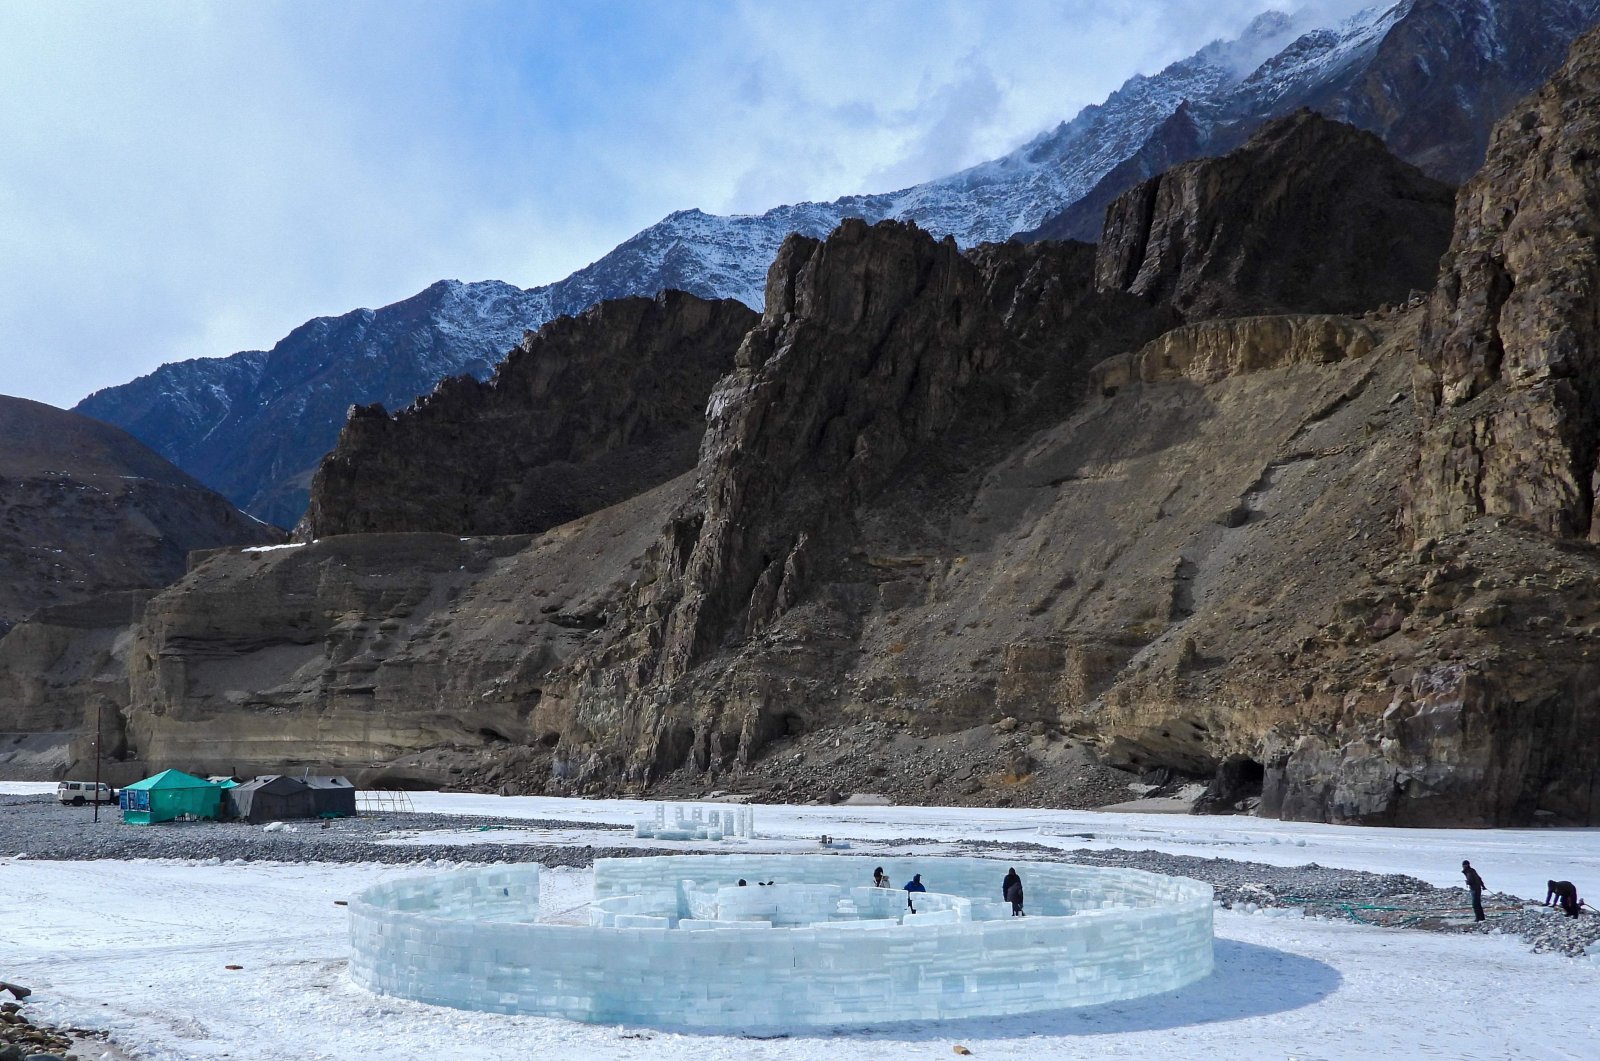 Kangsing, a group that performs ice and snow workshops, visits the &quot;mini-colosseum&quot; cafeteria in the village of Chilling, Ladakh, India, Feb. 7, 2022. (AFP Photo)